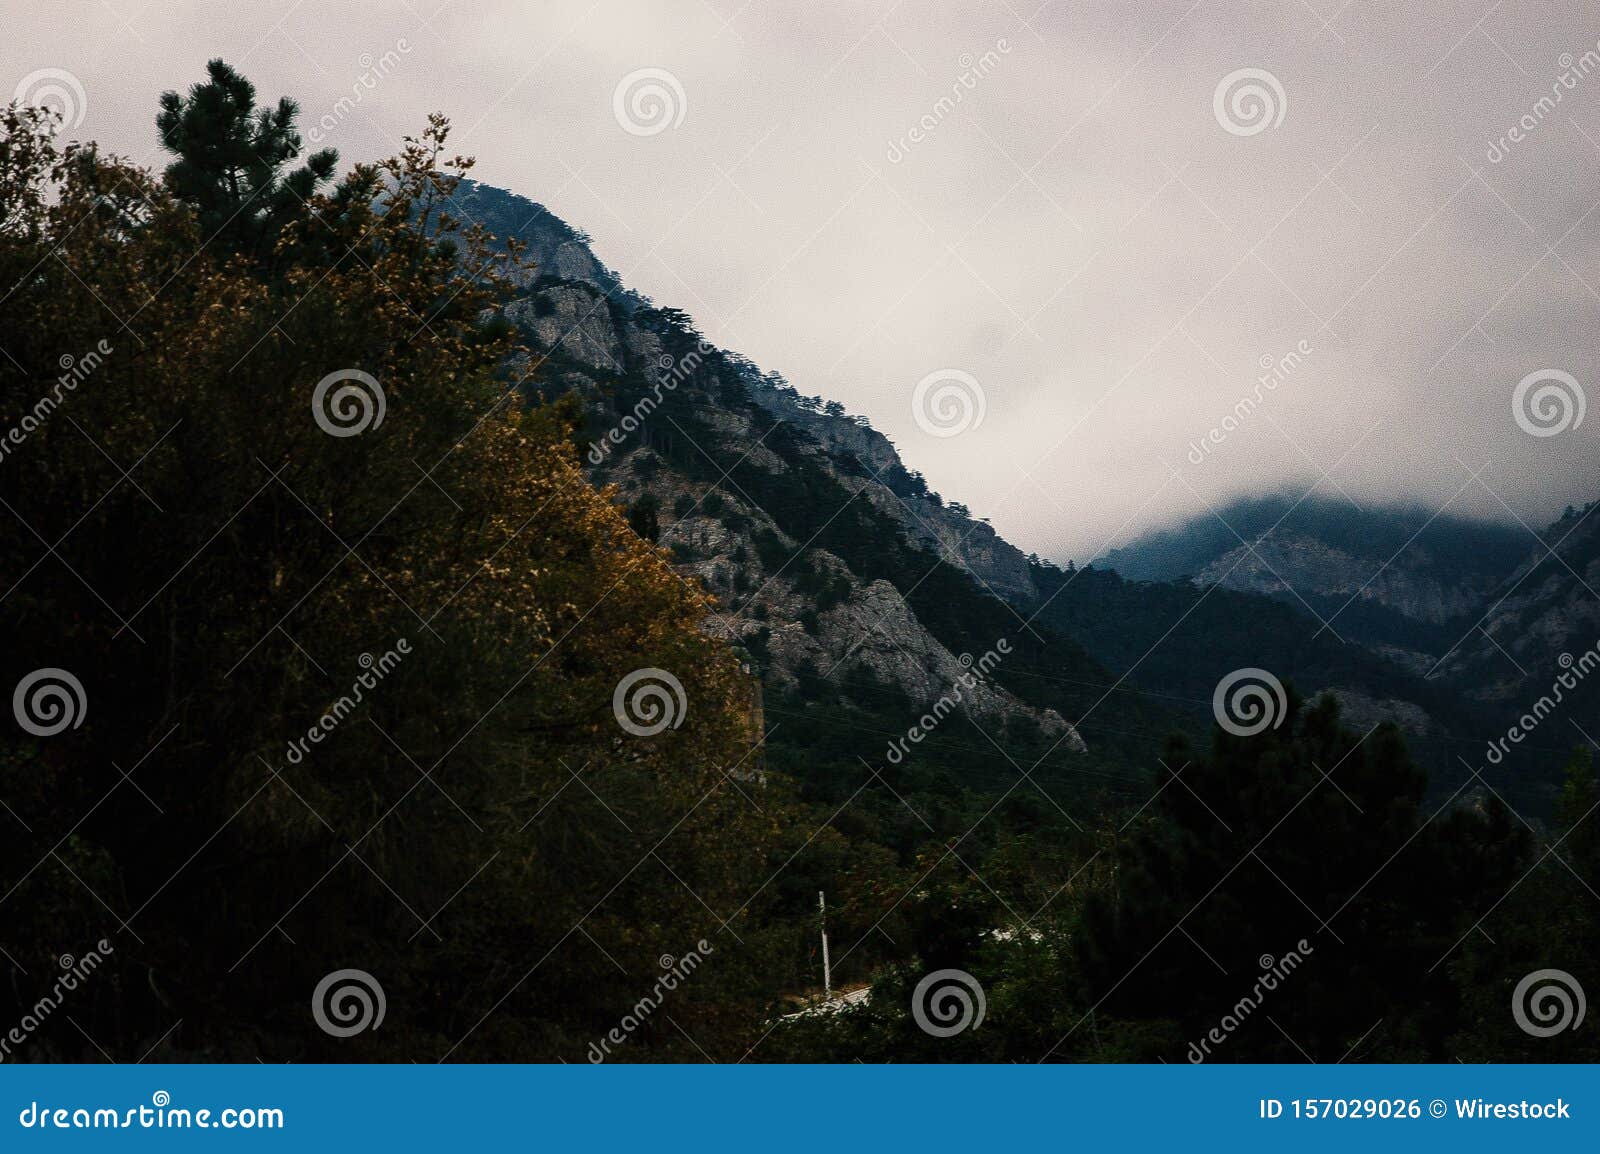 Wide Aerial Shot Of Mountains Surrounded By Trees Under A Foggy Sky